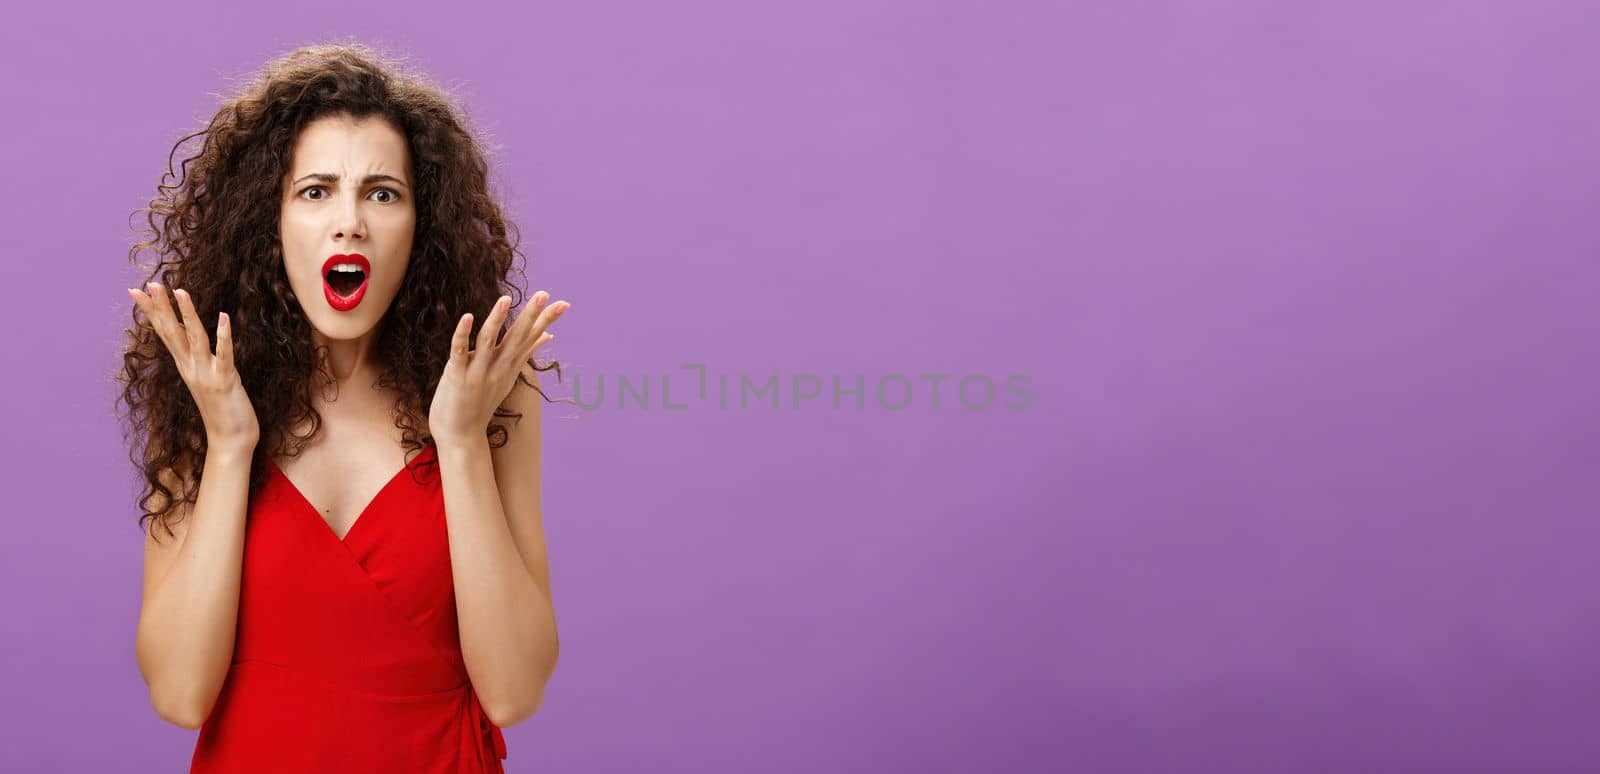 Rich arrogant and snobbish european woman. with curly hairstyle in red evening dress arguing with made frowning looking confused and displeased shaking palms in disappointment posing over purple wall.